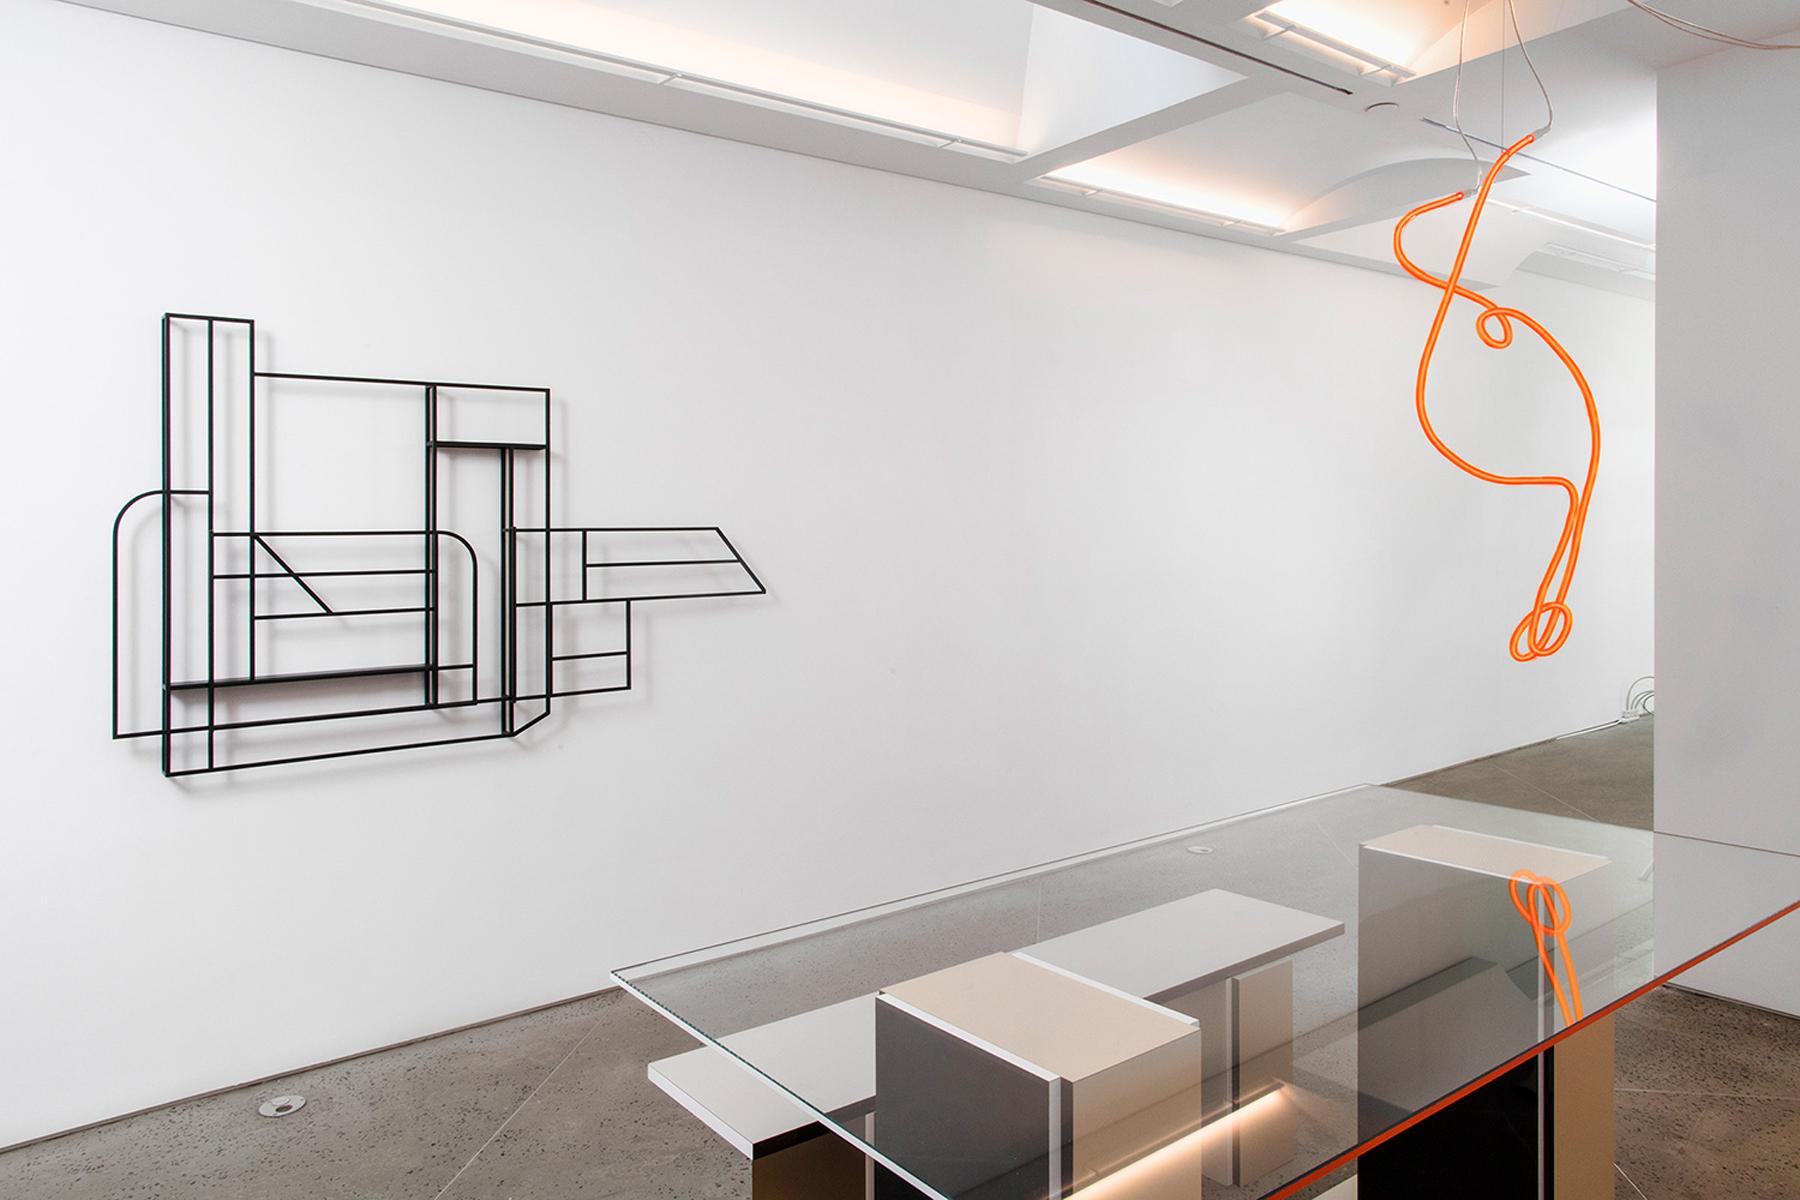 The abstract wall sculpture FOLDWORK – TRIPTYCH by STUDIO BERG appears to be shifting between a three-dimensional line drawing and, when opened, gently evoking the idea of an unfolded altar piece. TRIPTYCH is a hybrid object for placing goods or